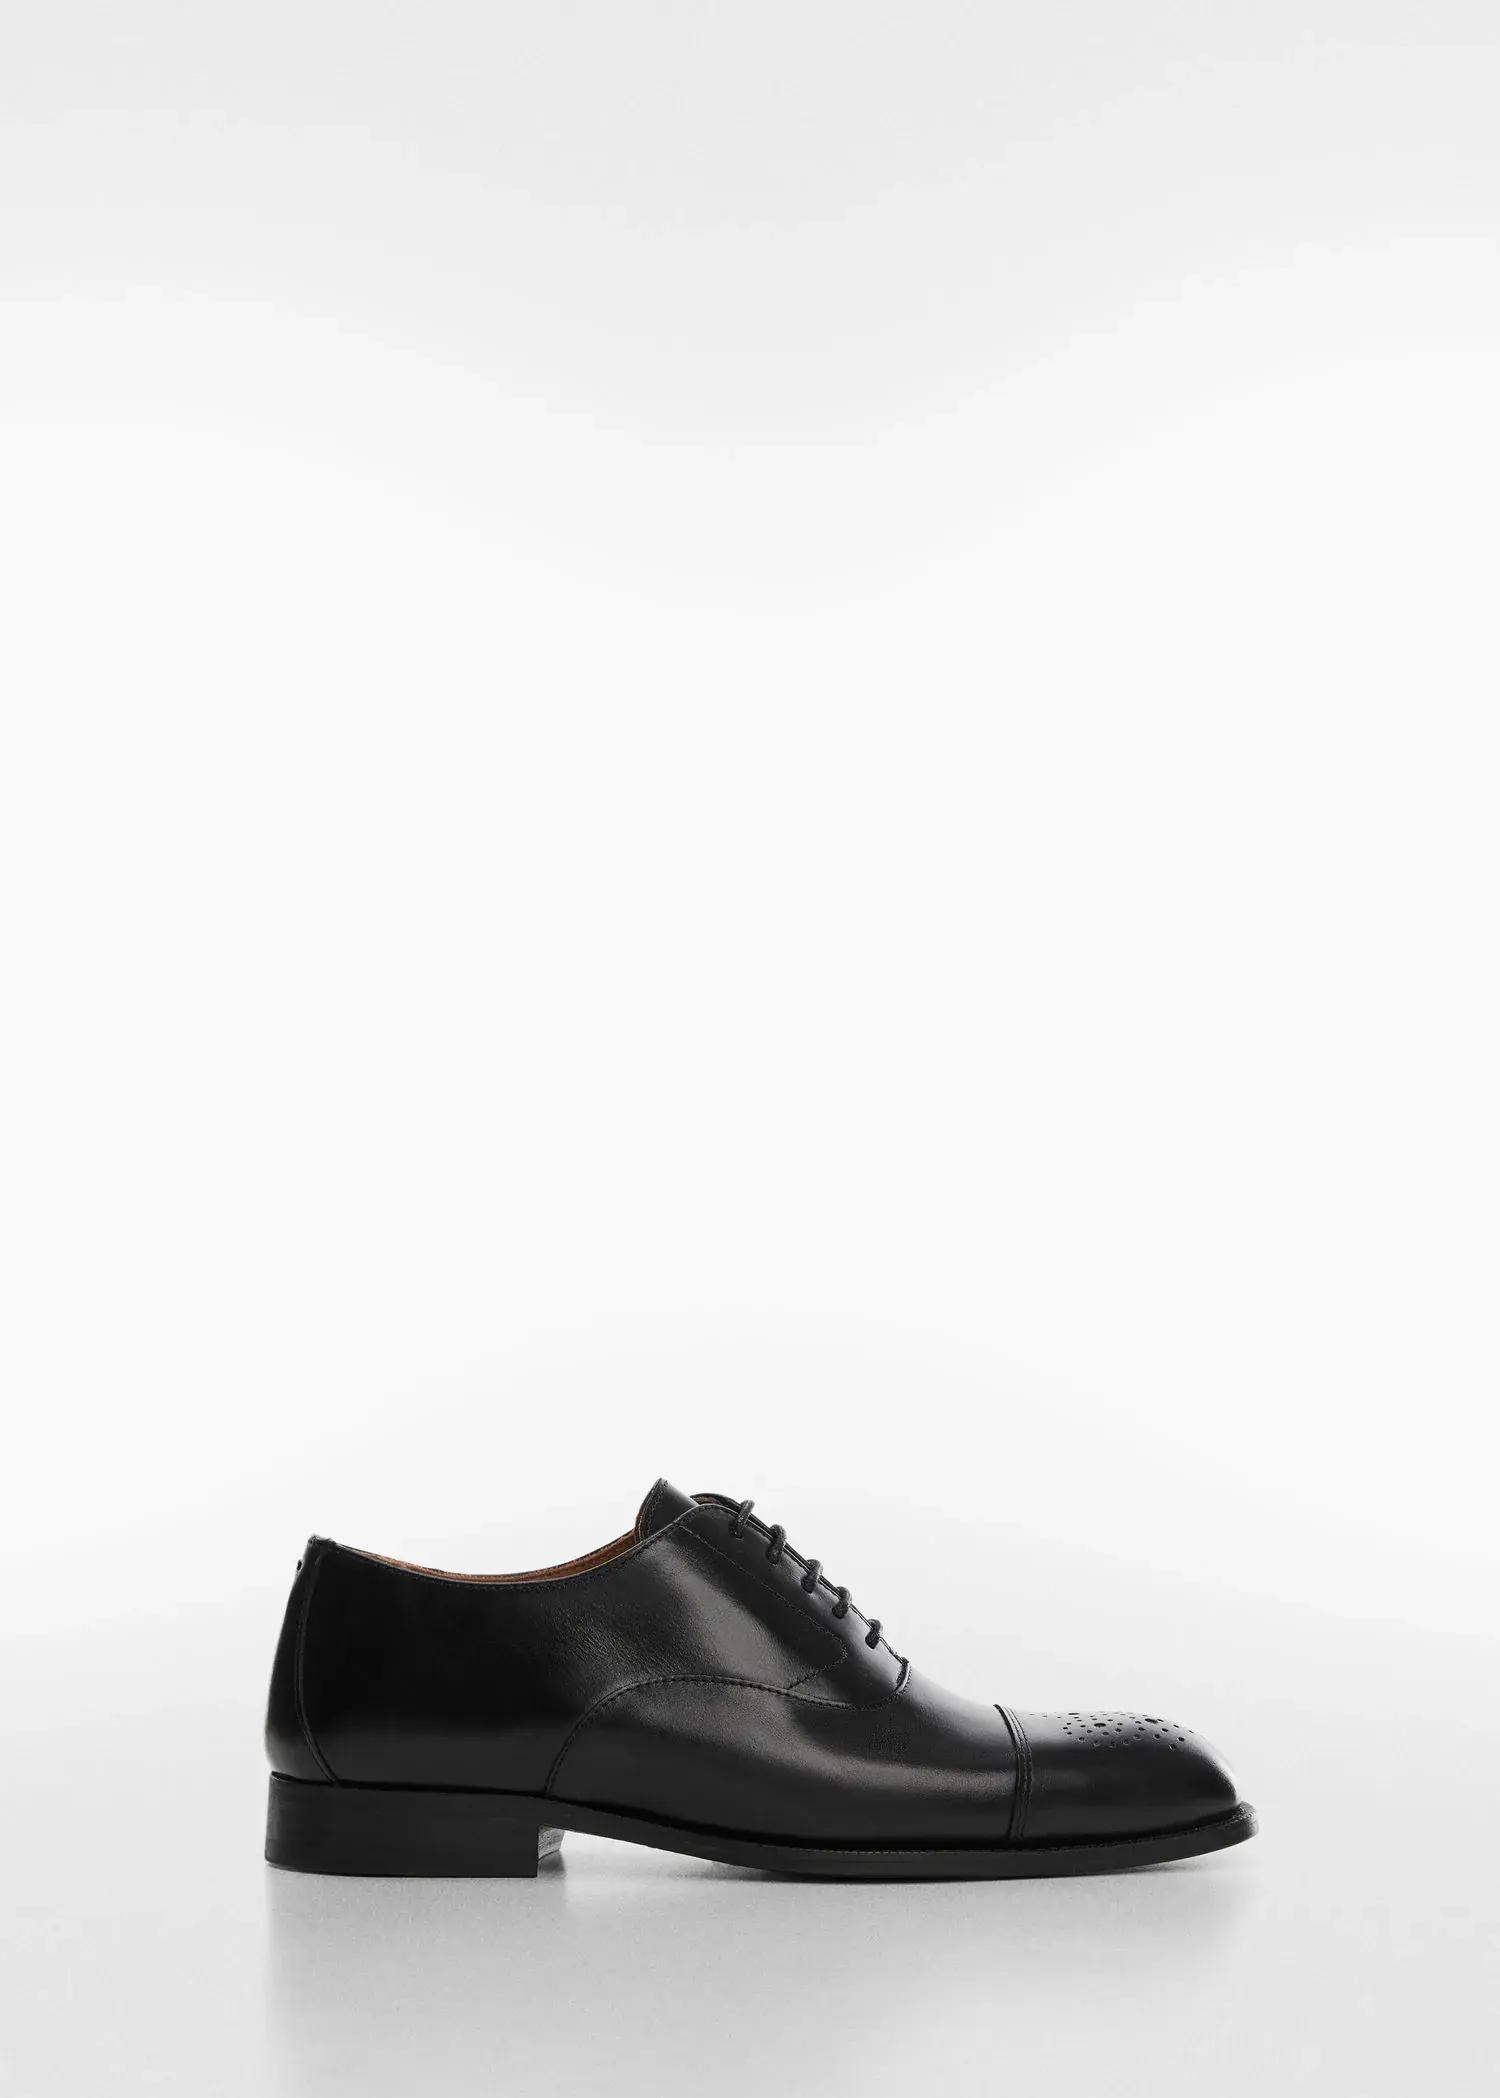 Mango Laser-cut leather blucher shoes. a pair of black shoes on a white background. 